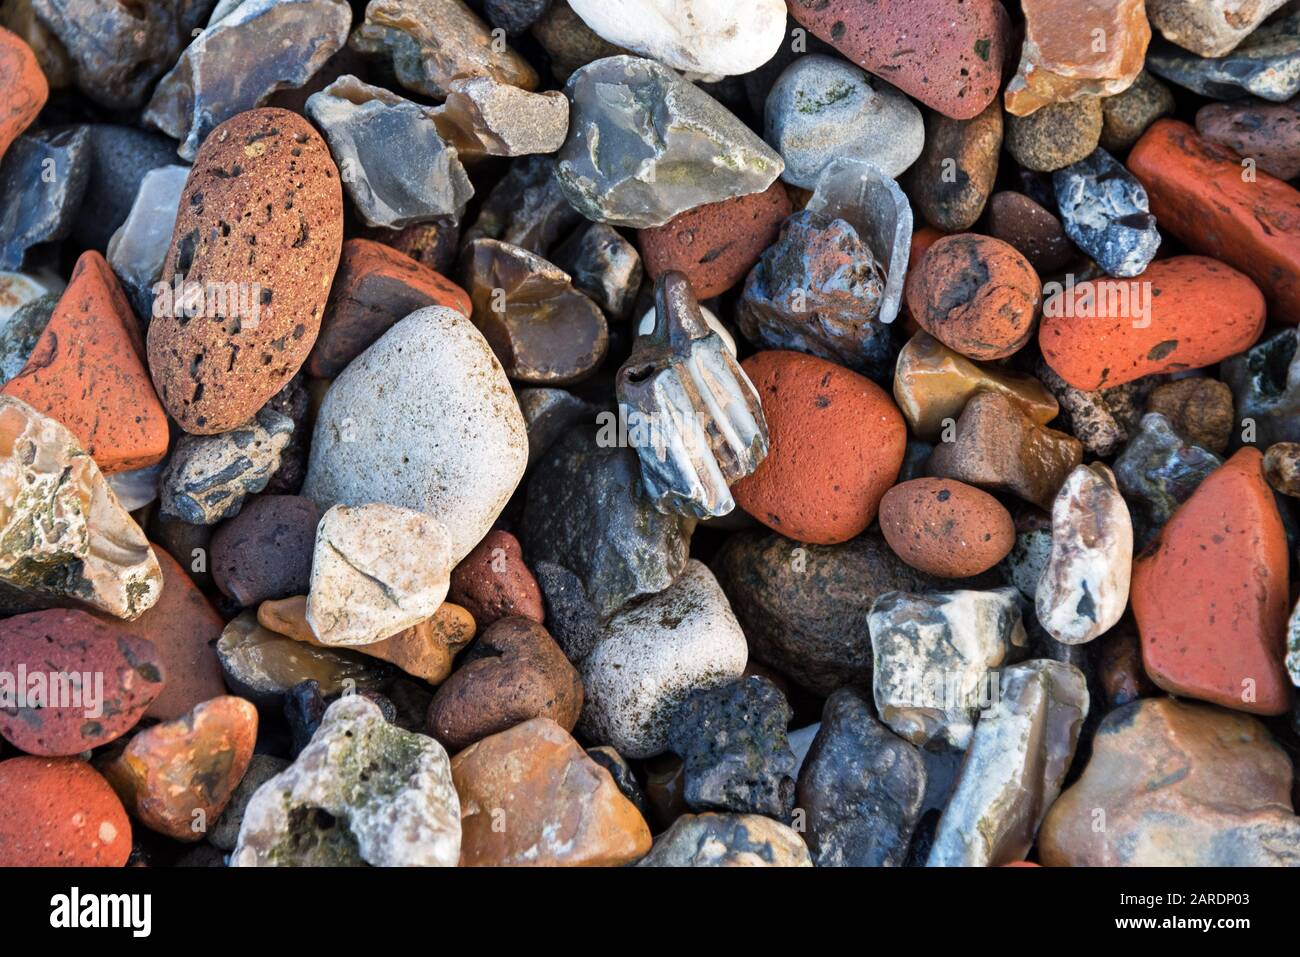 A large herbivore tooth among brick and chalk pebbles, Greenwich, London. Stock Photo